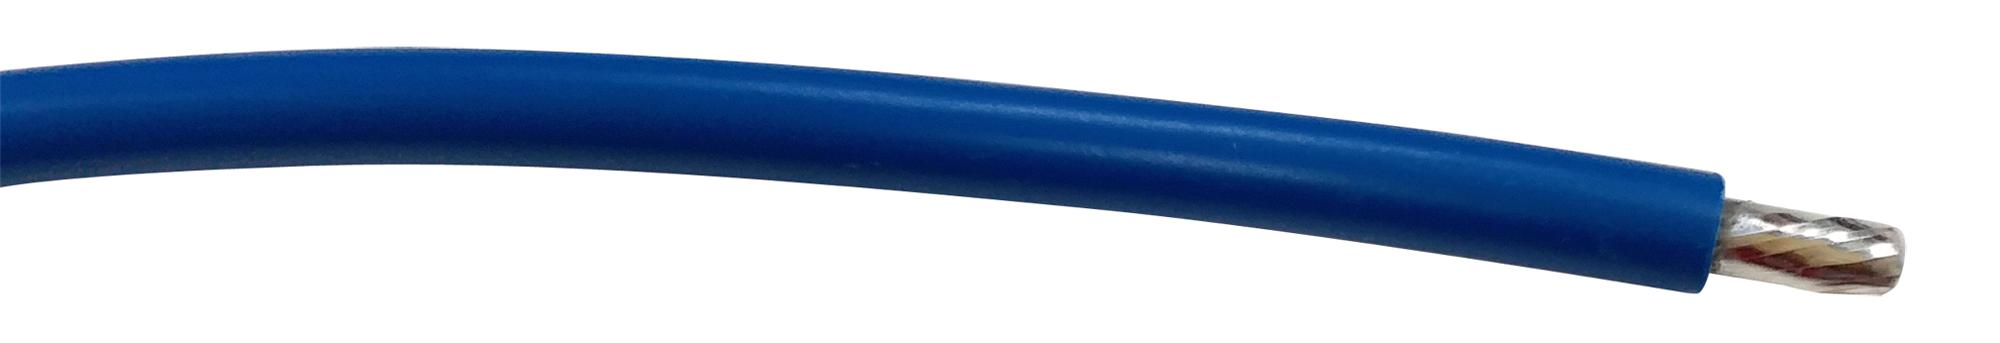 PP002498 CABLE WIRE, 22AWG, BLUE, 305M PRO POWER